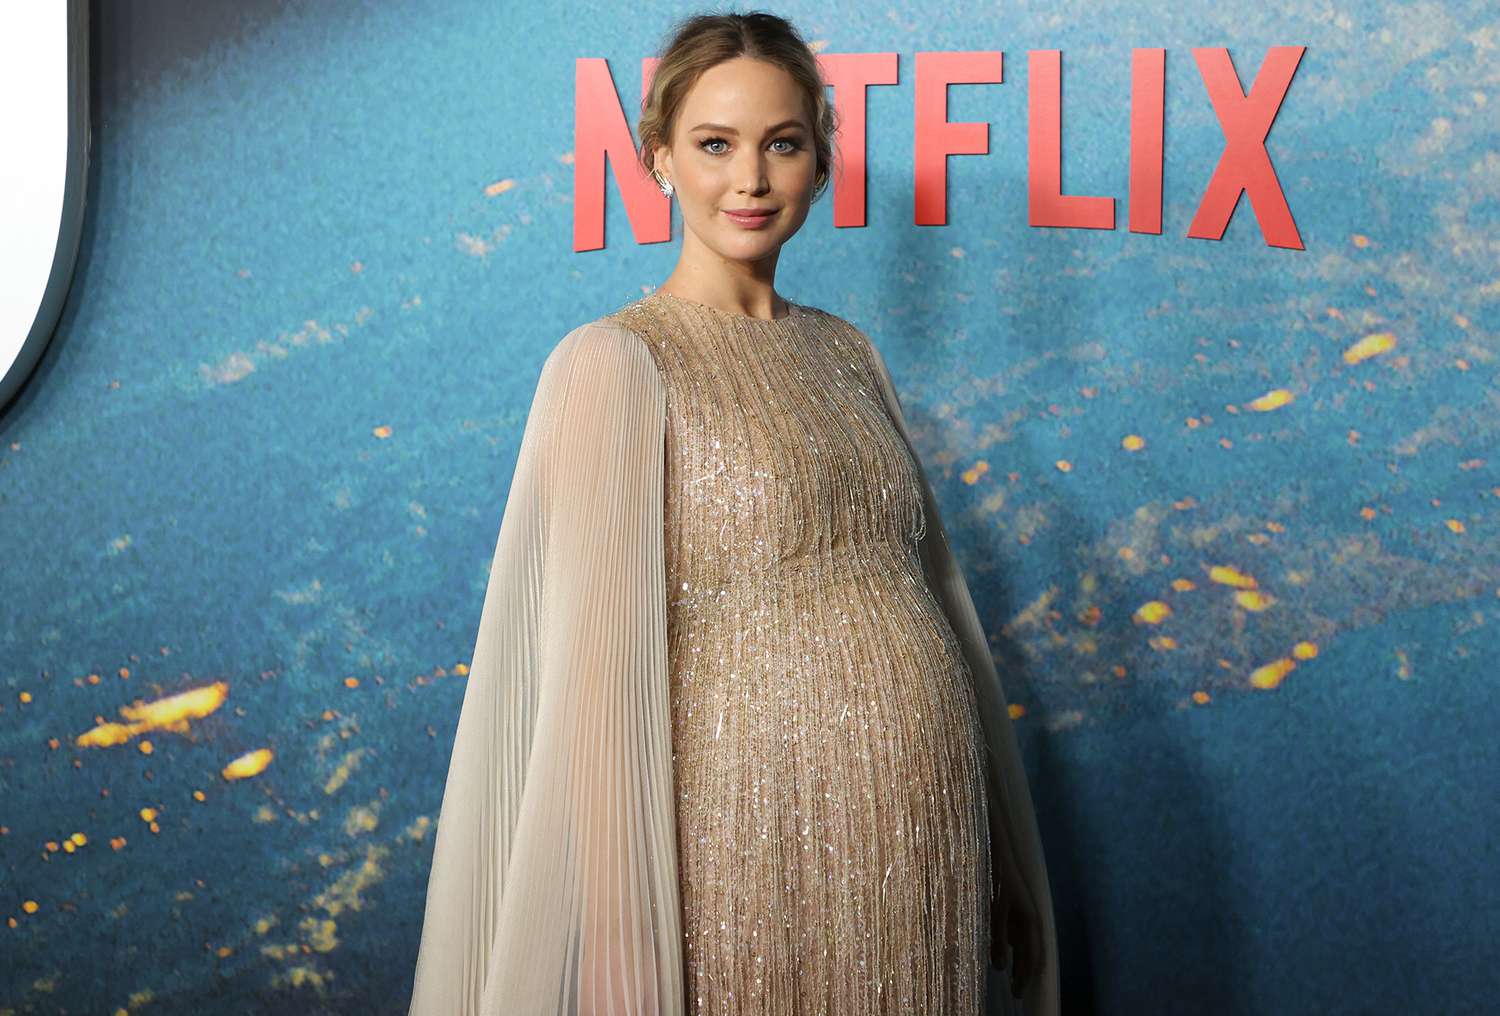 Jennifer Lawrence Welcomes First Baby with Husband Cooke Maroney | PEOPLE.com